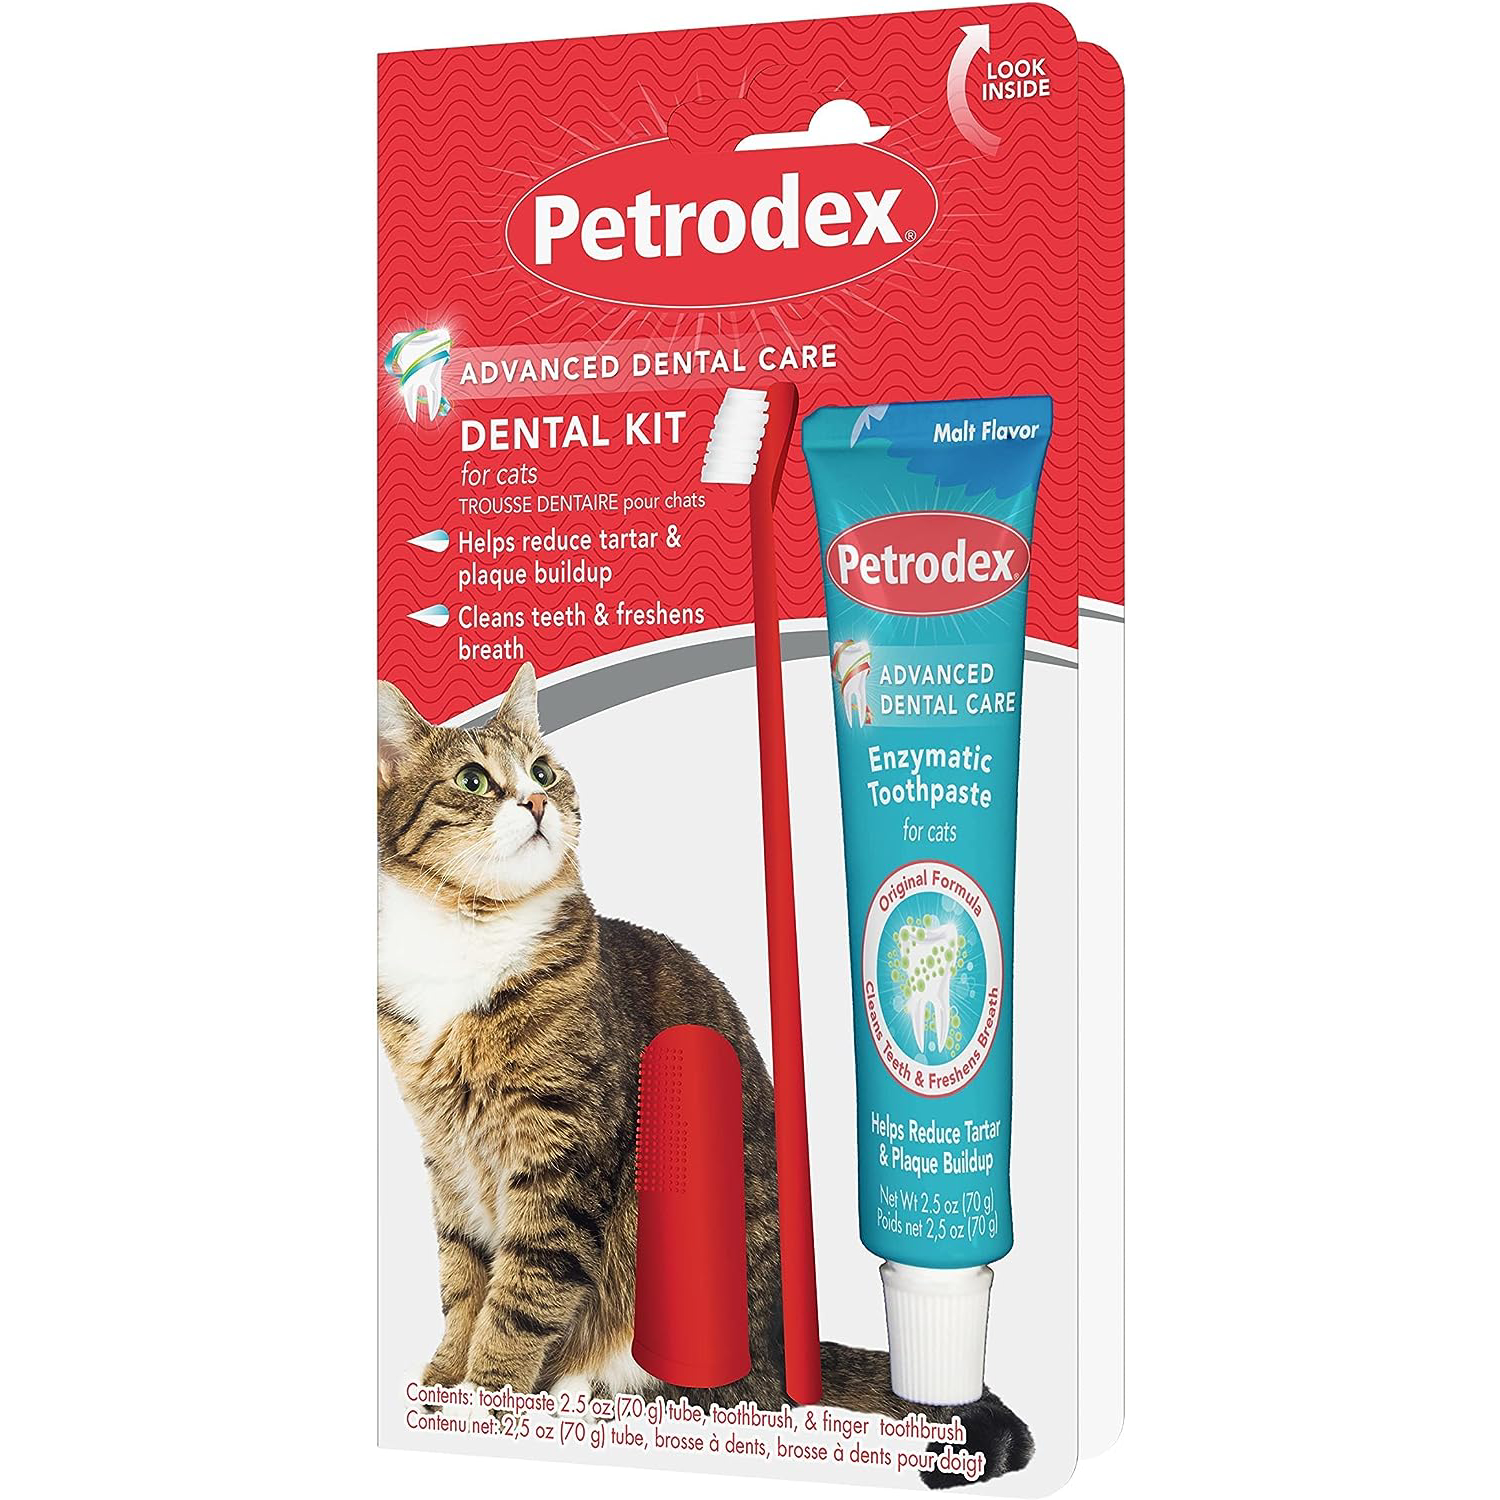 Petrodex Dental Care Kit for Cats, Cat Toothbrush and Toothpaste, Cleans Teeth and Fights Bad Breath, Reduces Plaque Tartar Formation, Malt Flavor, 2.5oz Toothpaste + Toothbrush new